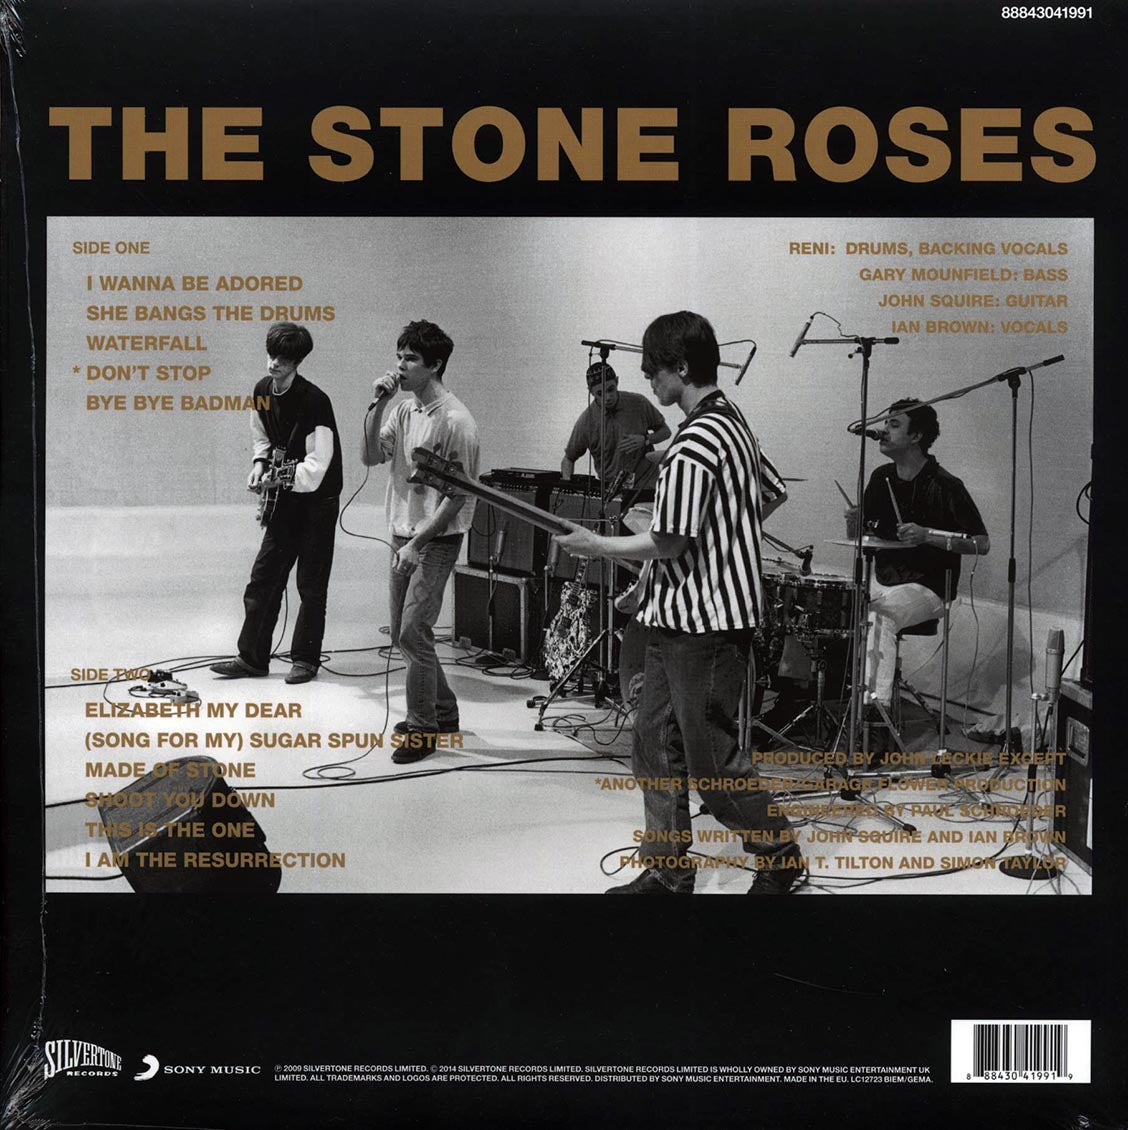 The Stone Roses - The Stone Roses [2018 Reissue Embossed] [New Vinyl Record LP]